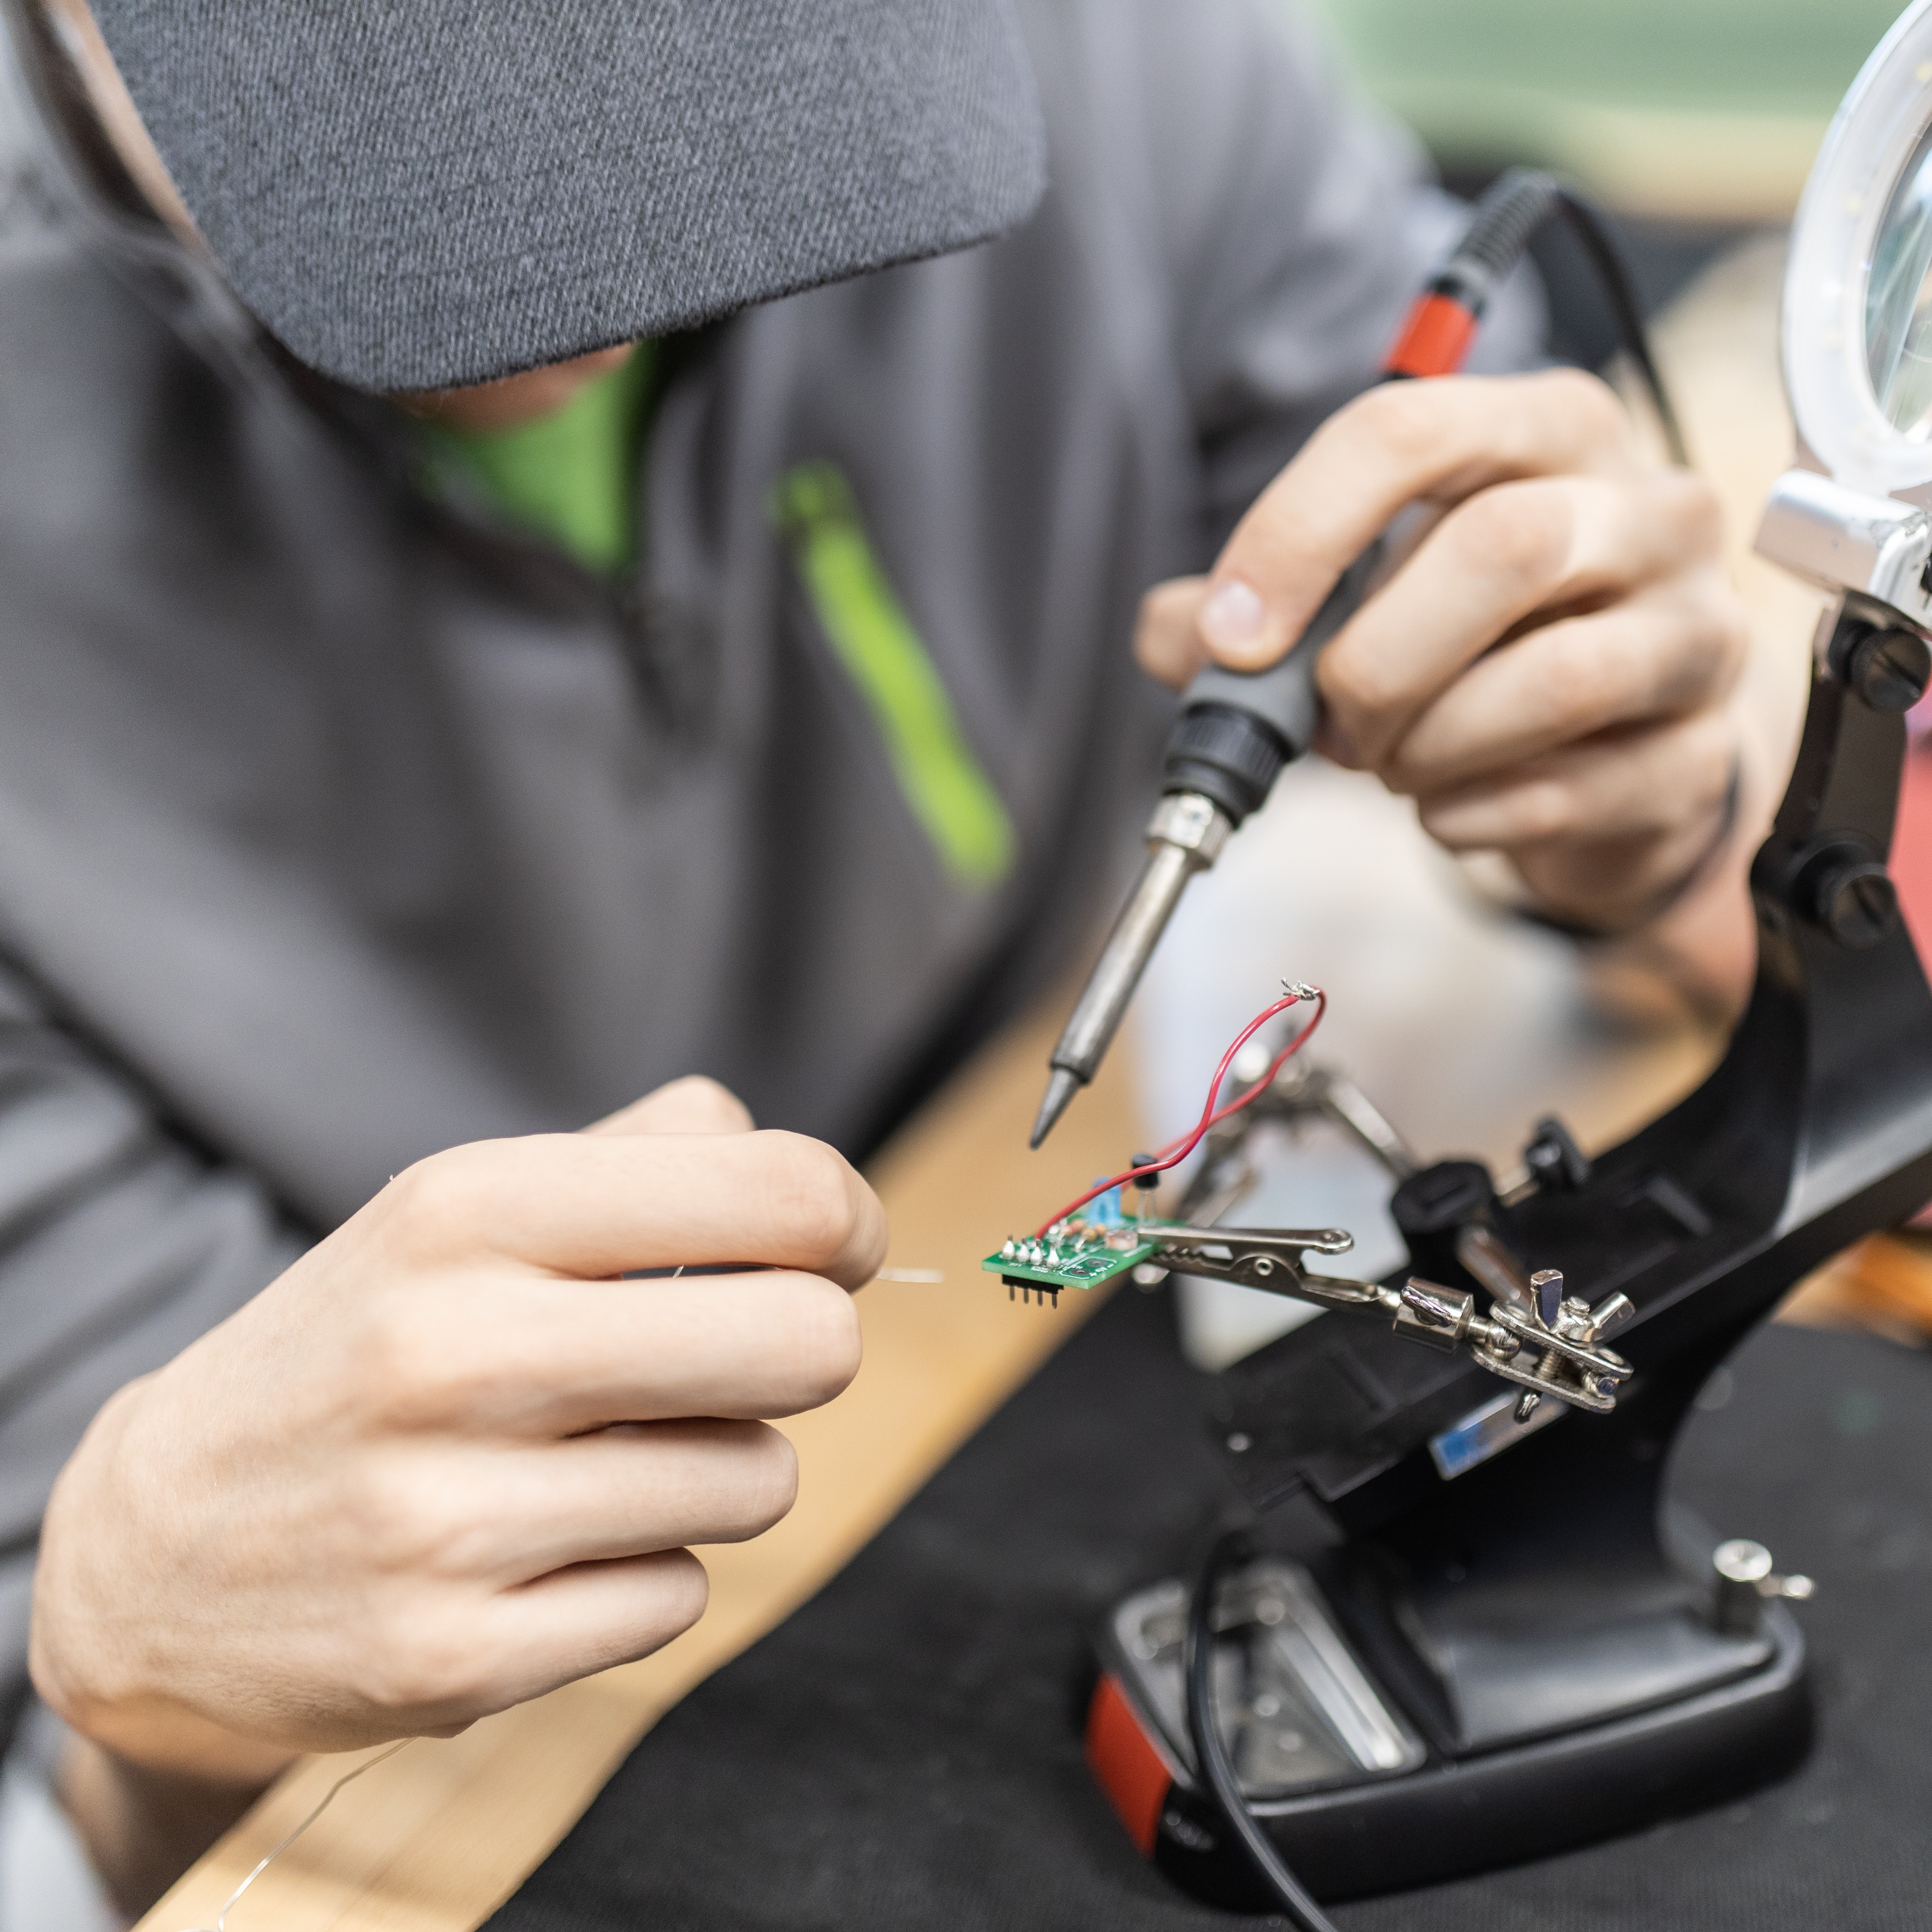 A student soldering a wire to a chip.